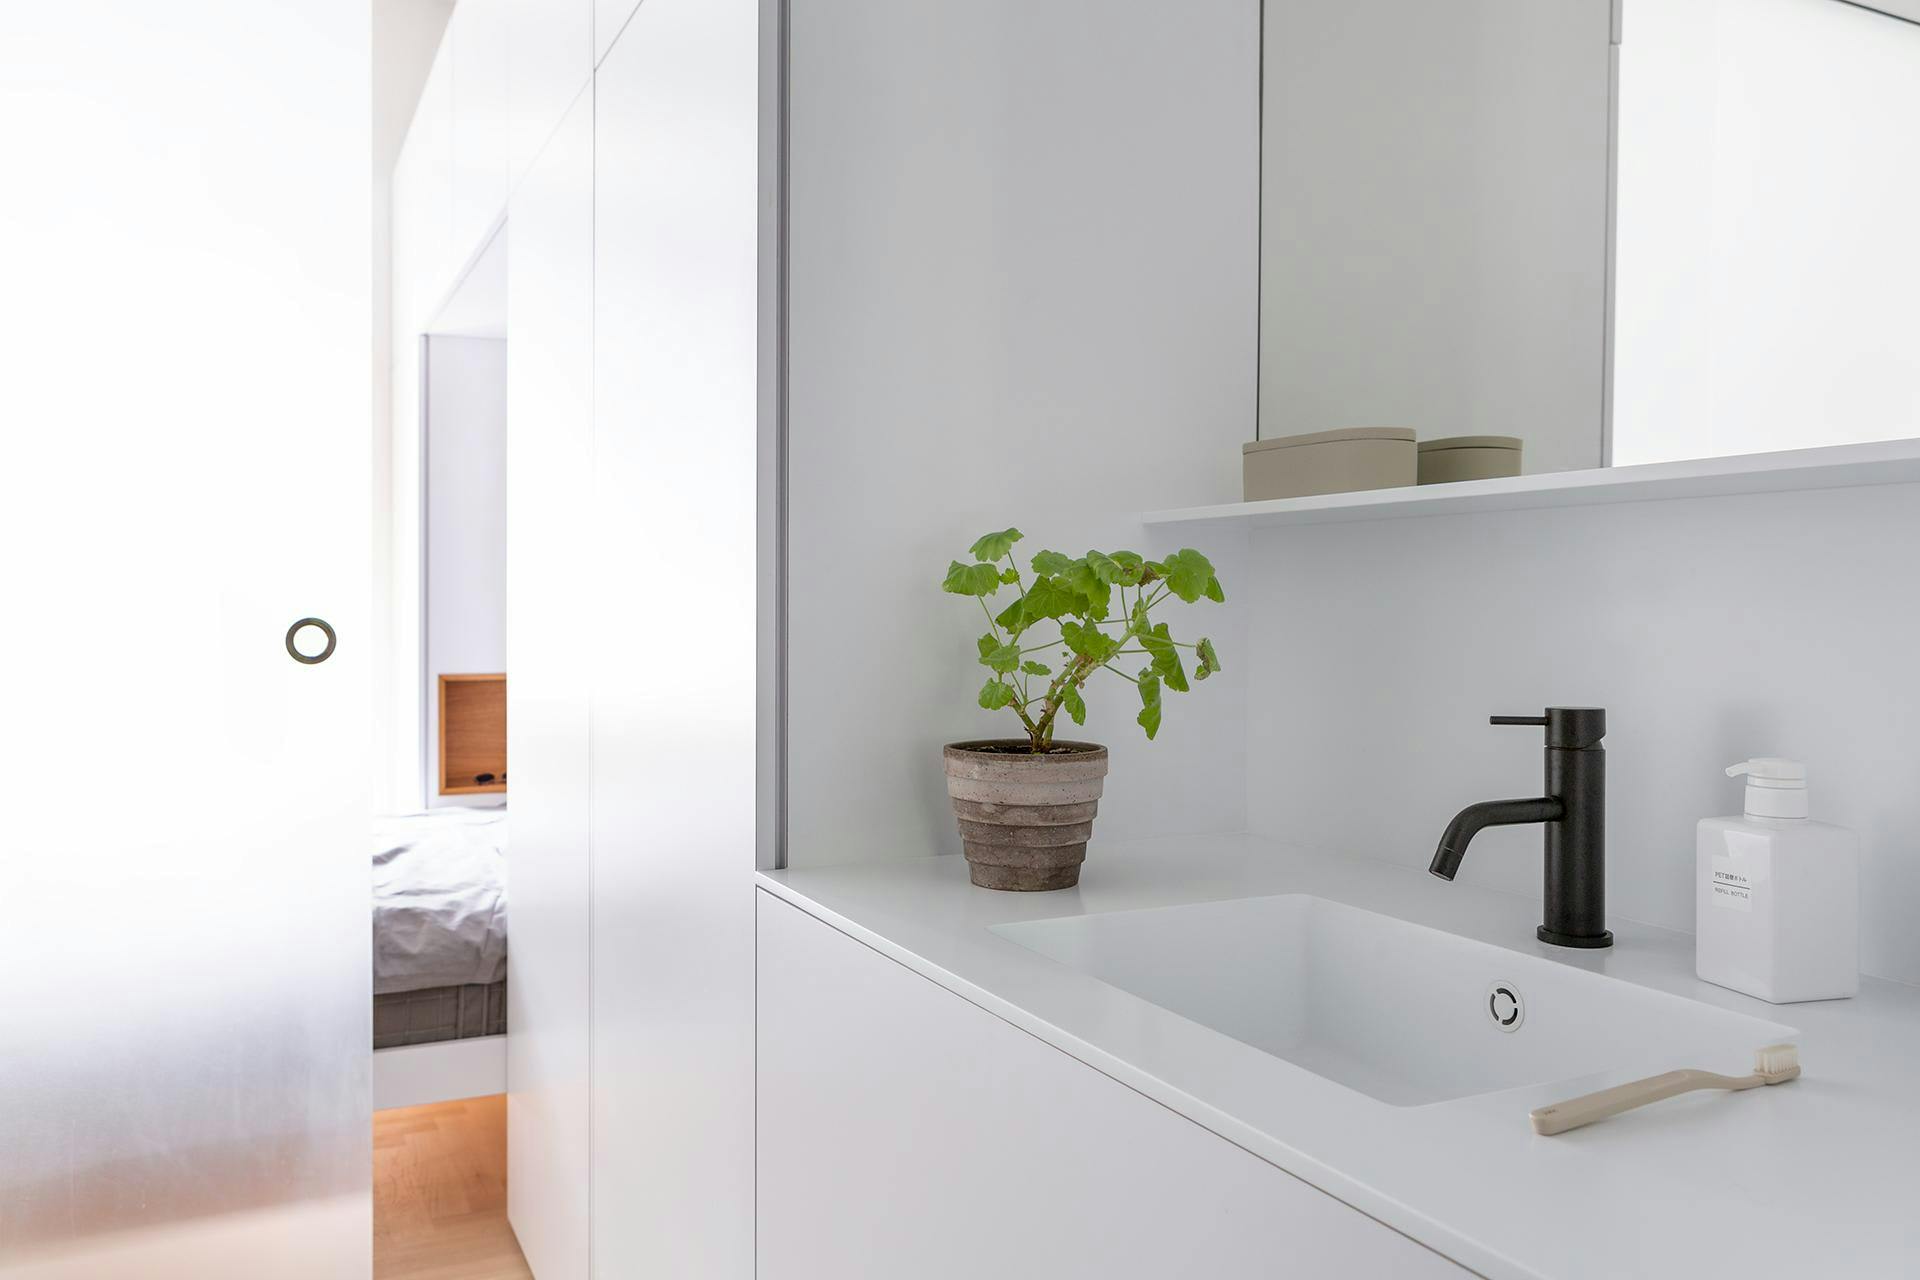 The image features a clean, white bathroom with a sink and a mirror. The sink is located on the left side of the room, while the mirror is positioned above it. A potted plant is placed on the right side of the room, adding a touch of greenery to the space.

In addition to the sink and mirror, there are two bottles in the bathroom. One bottle is located on the left side of the room, while the other is situated on the right side, closer to the potted plant. There is also a toothbrush placed near the sink, indicating that the bath